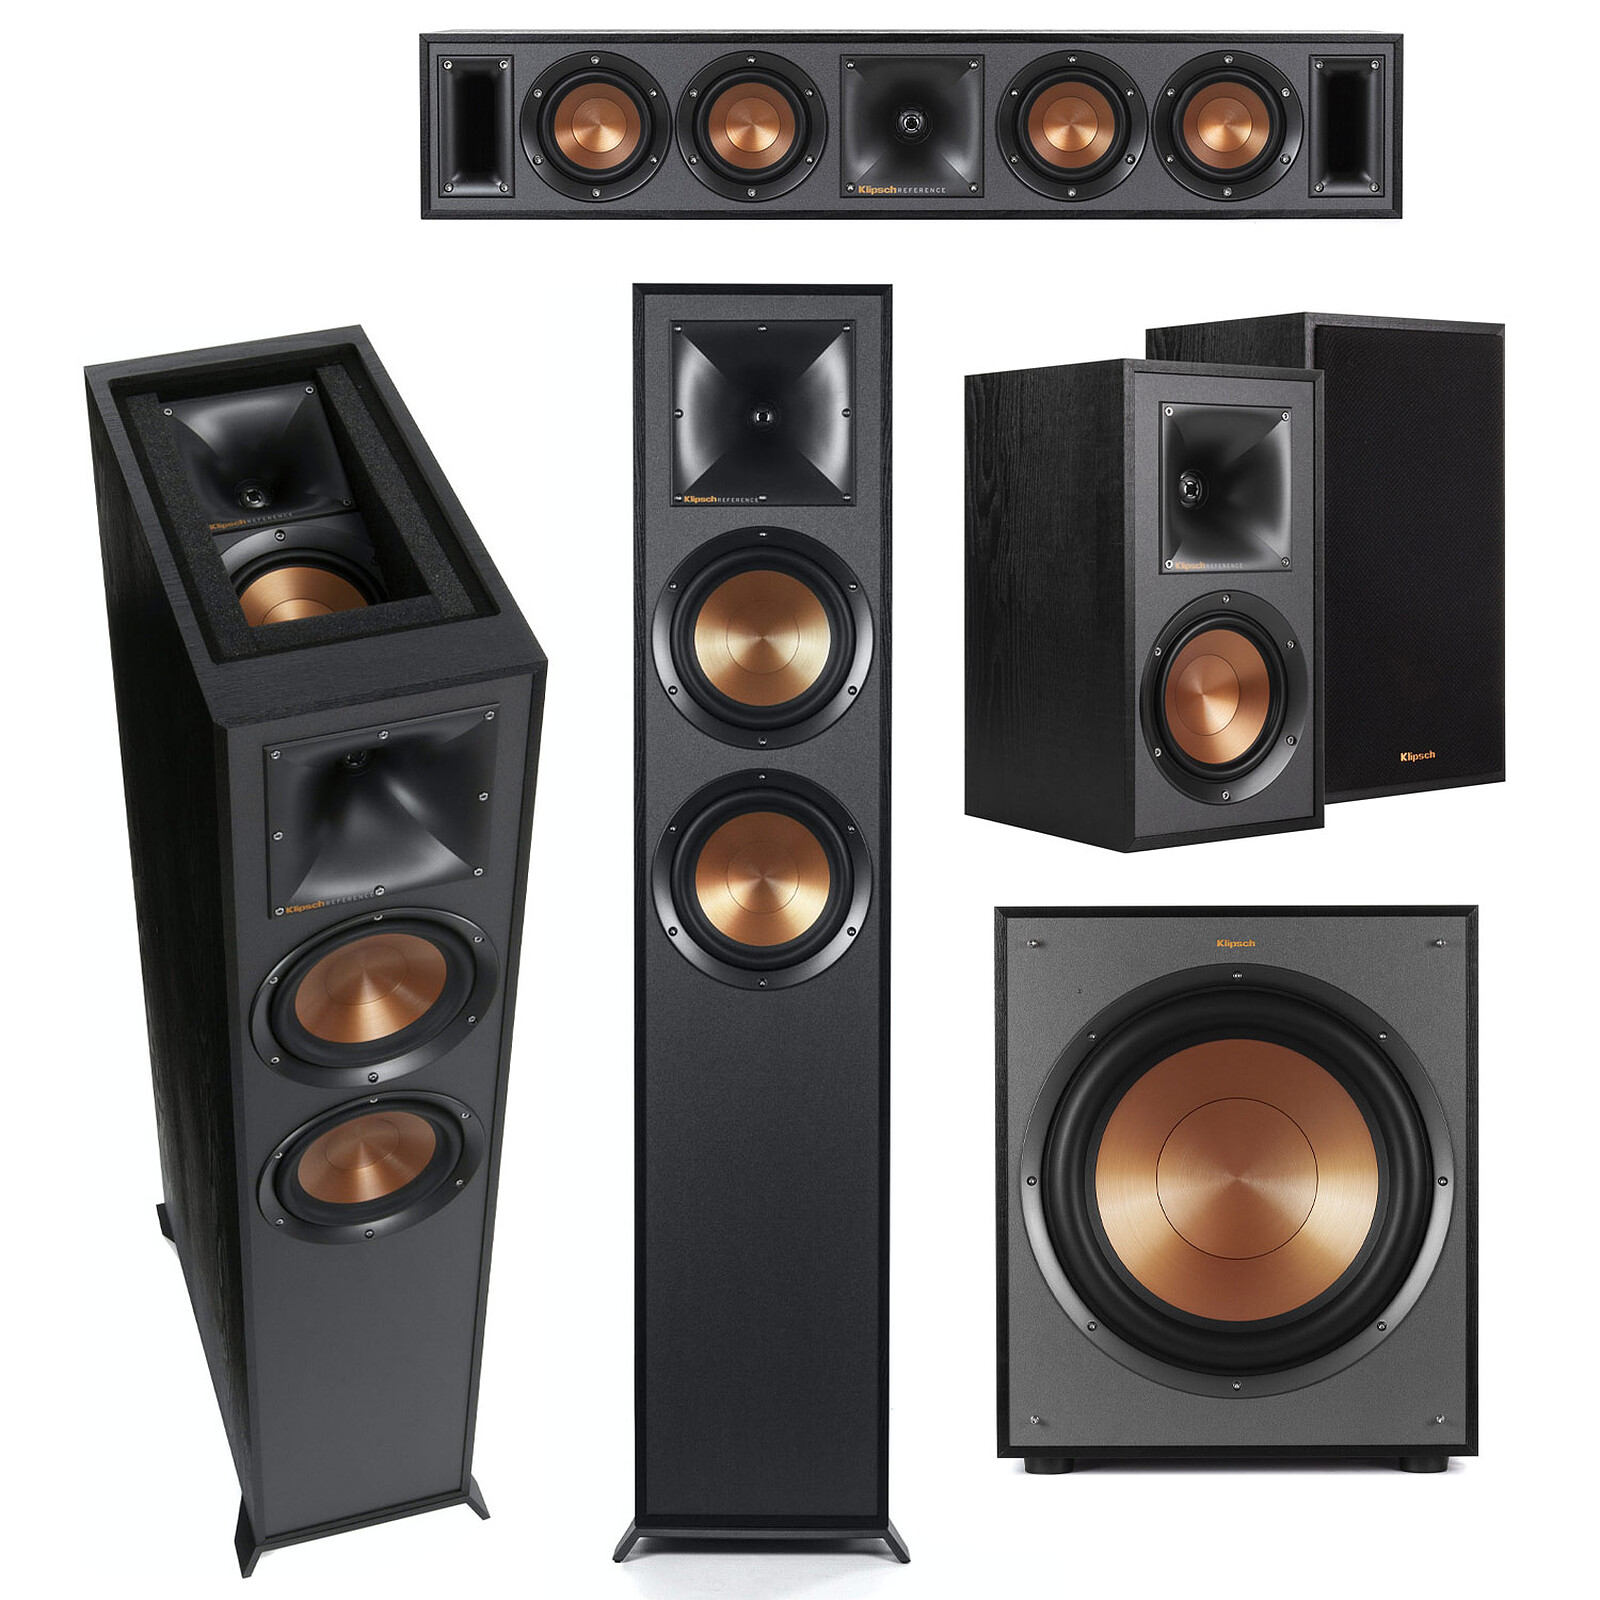 R-625FA 5.1.2 Dolby Atmos Home Theater System